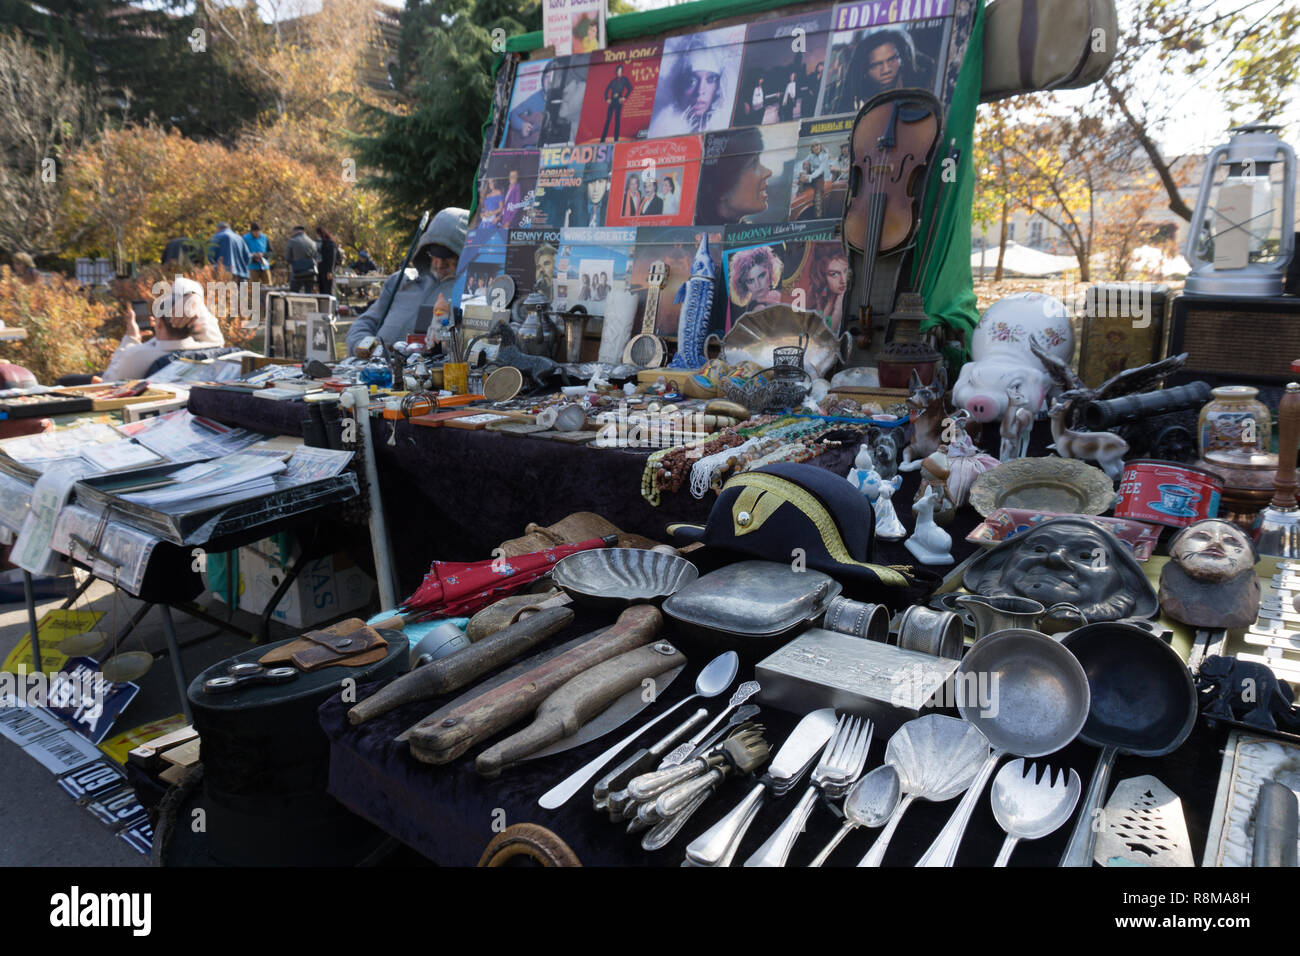 View of a stall of a street market Stock Photo